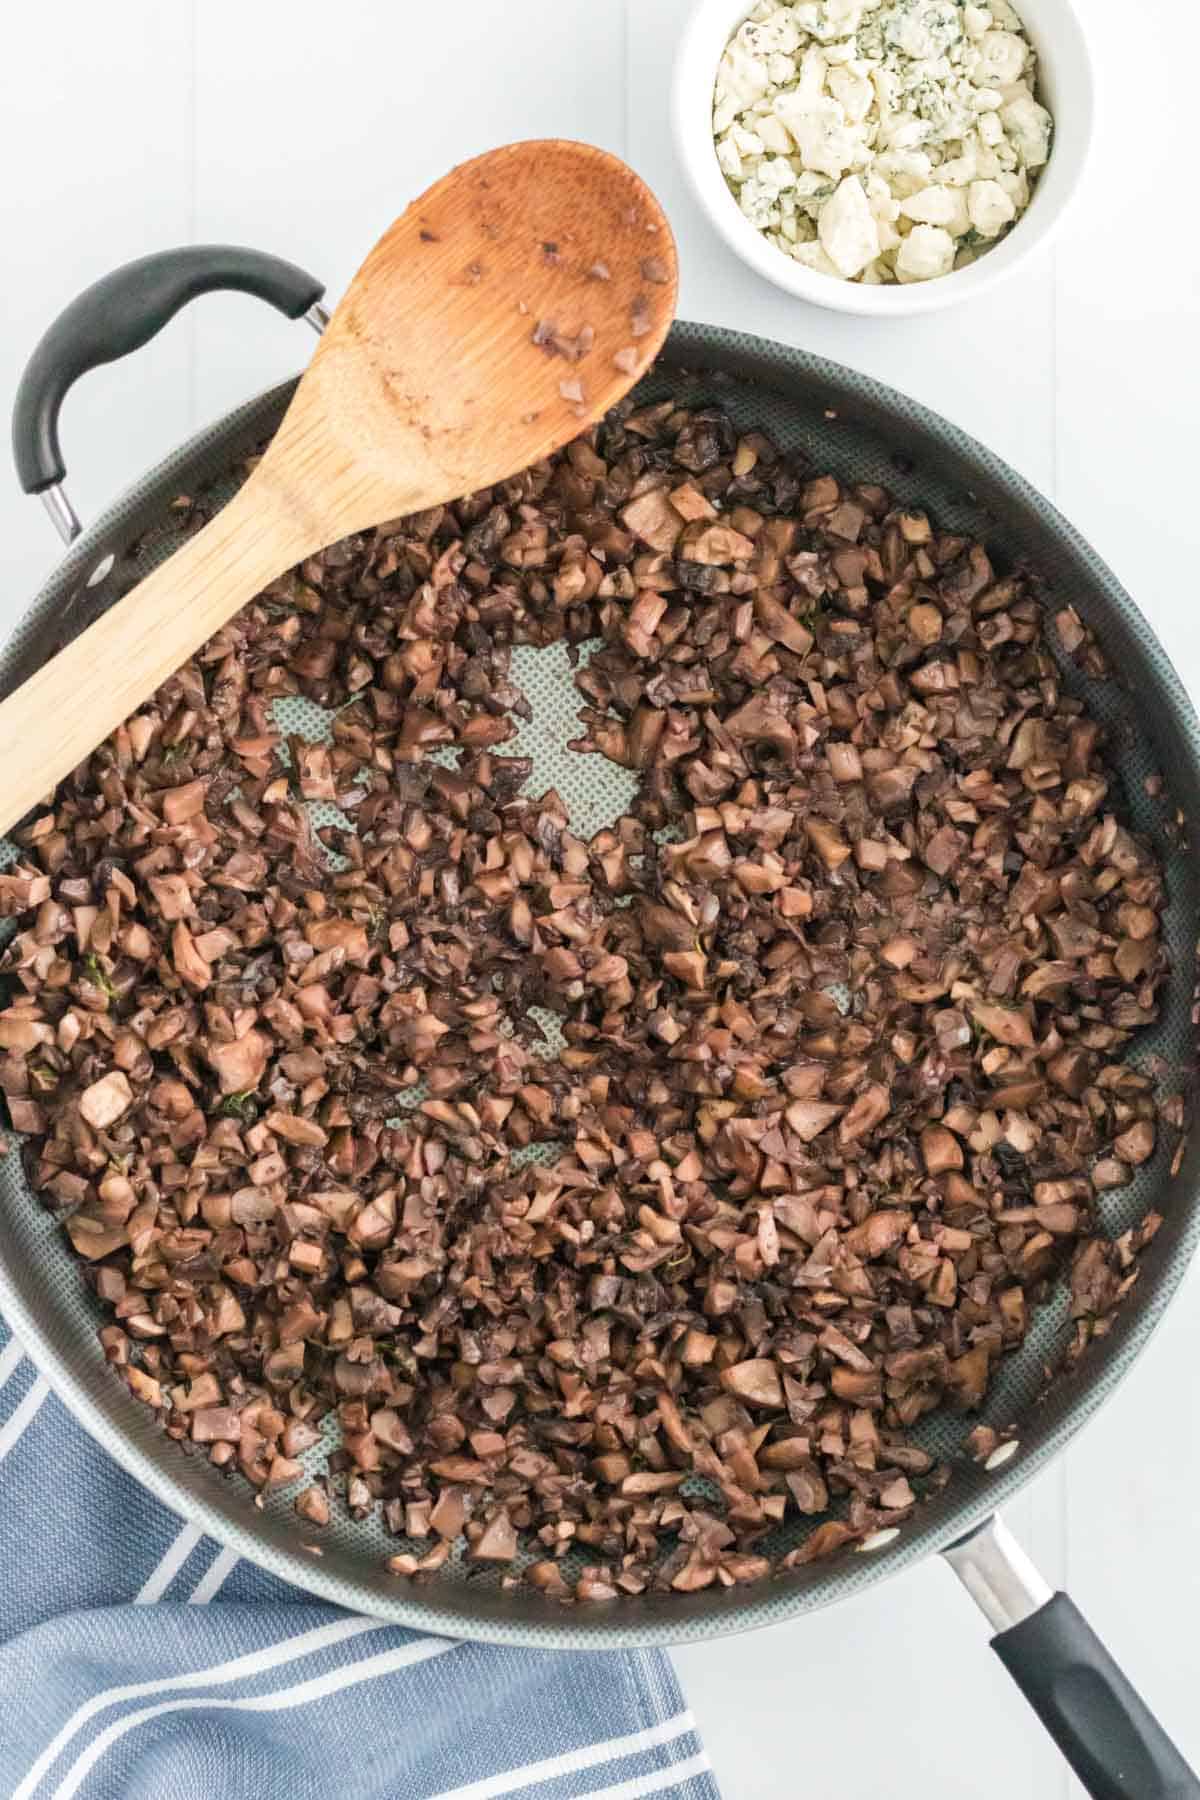 Sauteed mushroom duxelles in a skillet with a wooden spoon.